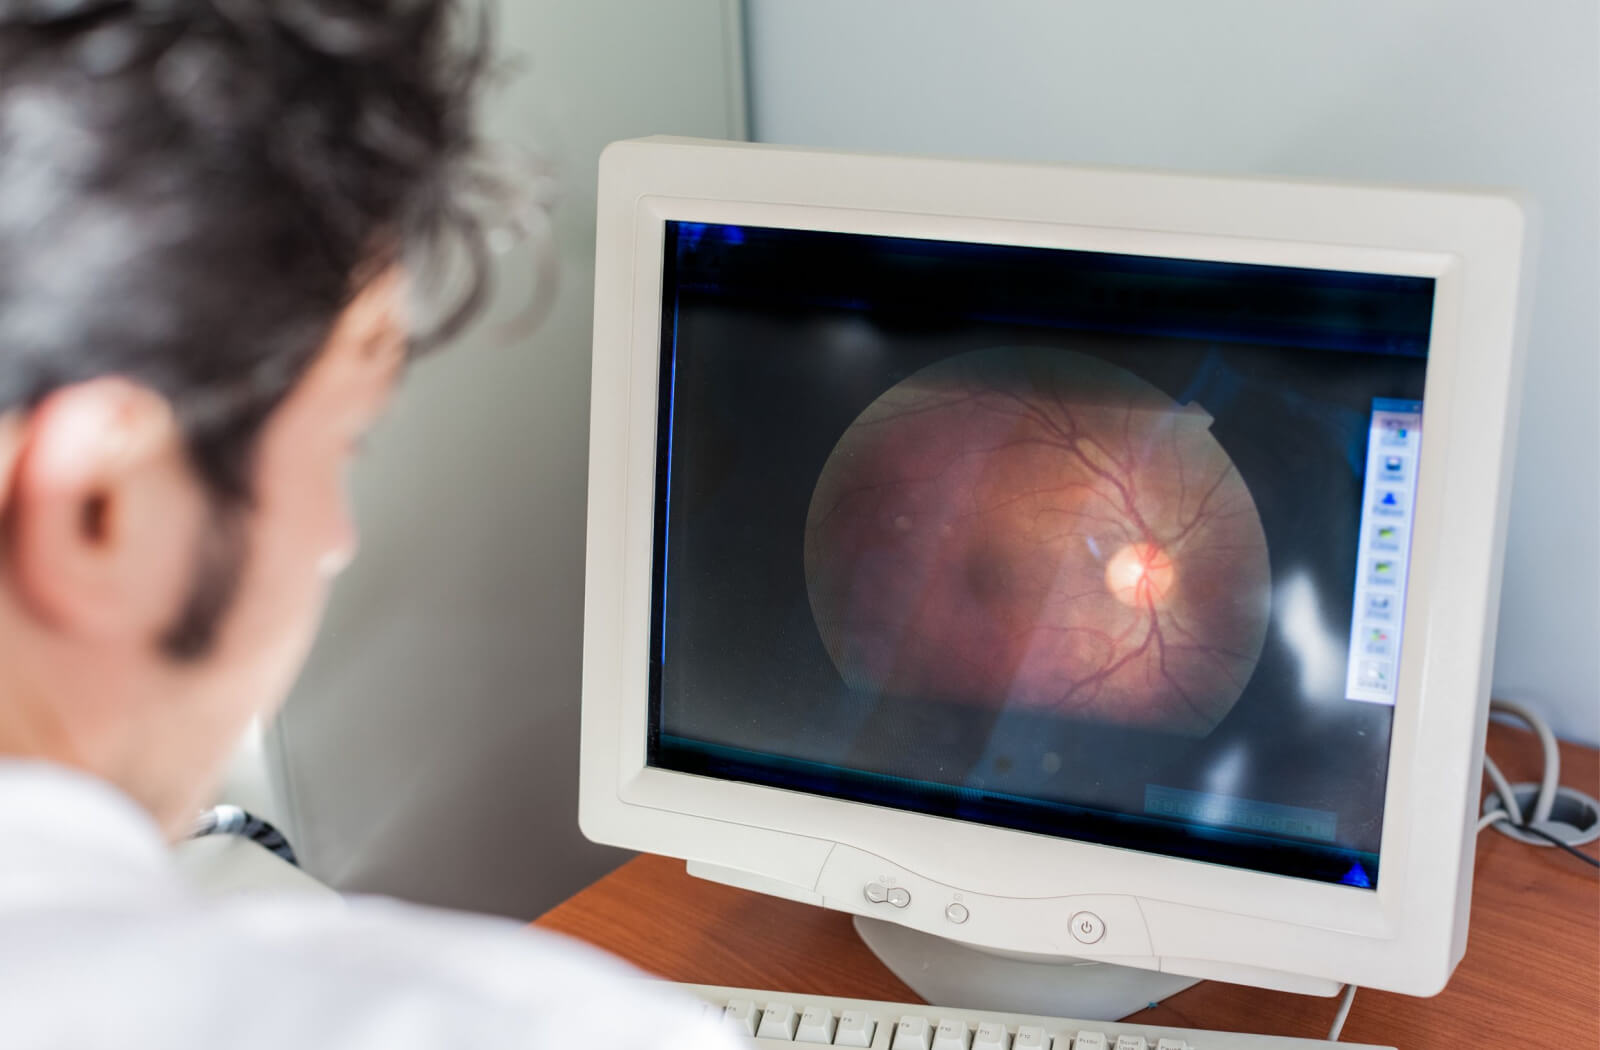 An image of a retina on a computer screen. A male eye doctor is out of focus in the foreground, looking at the image.